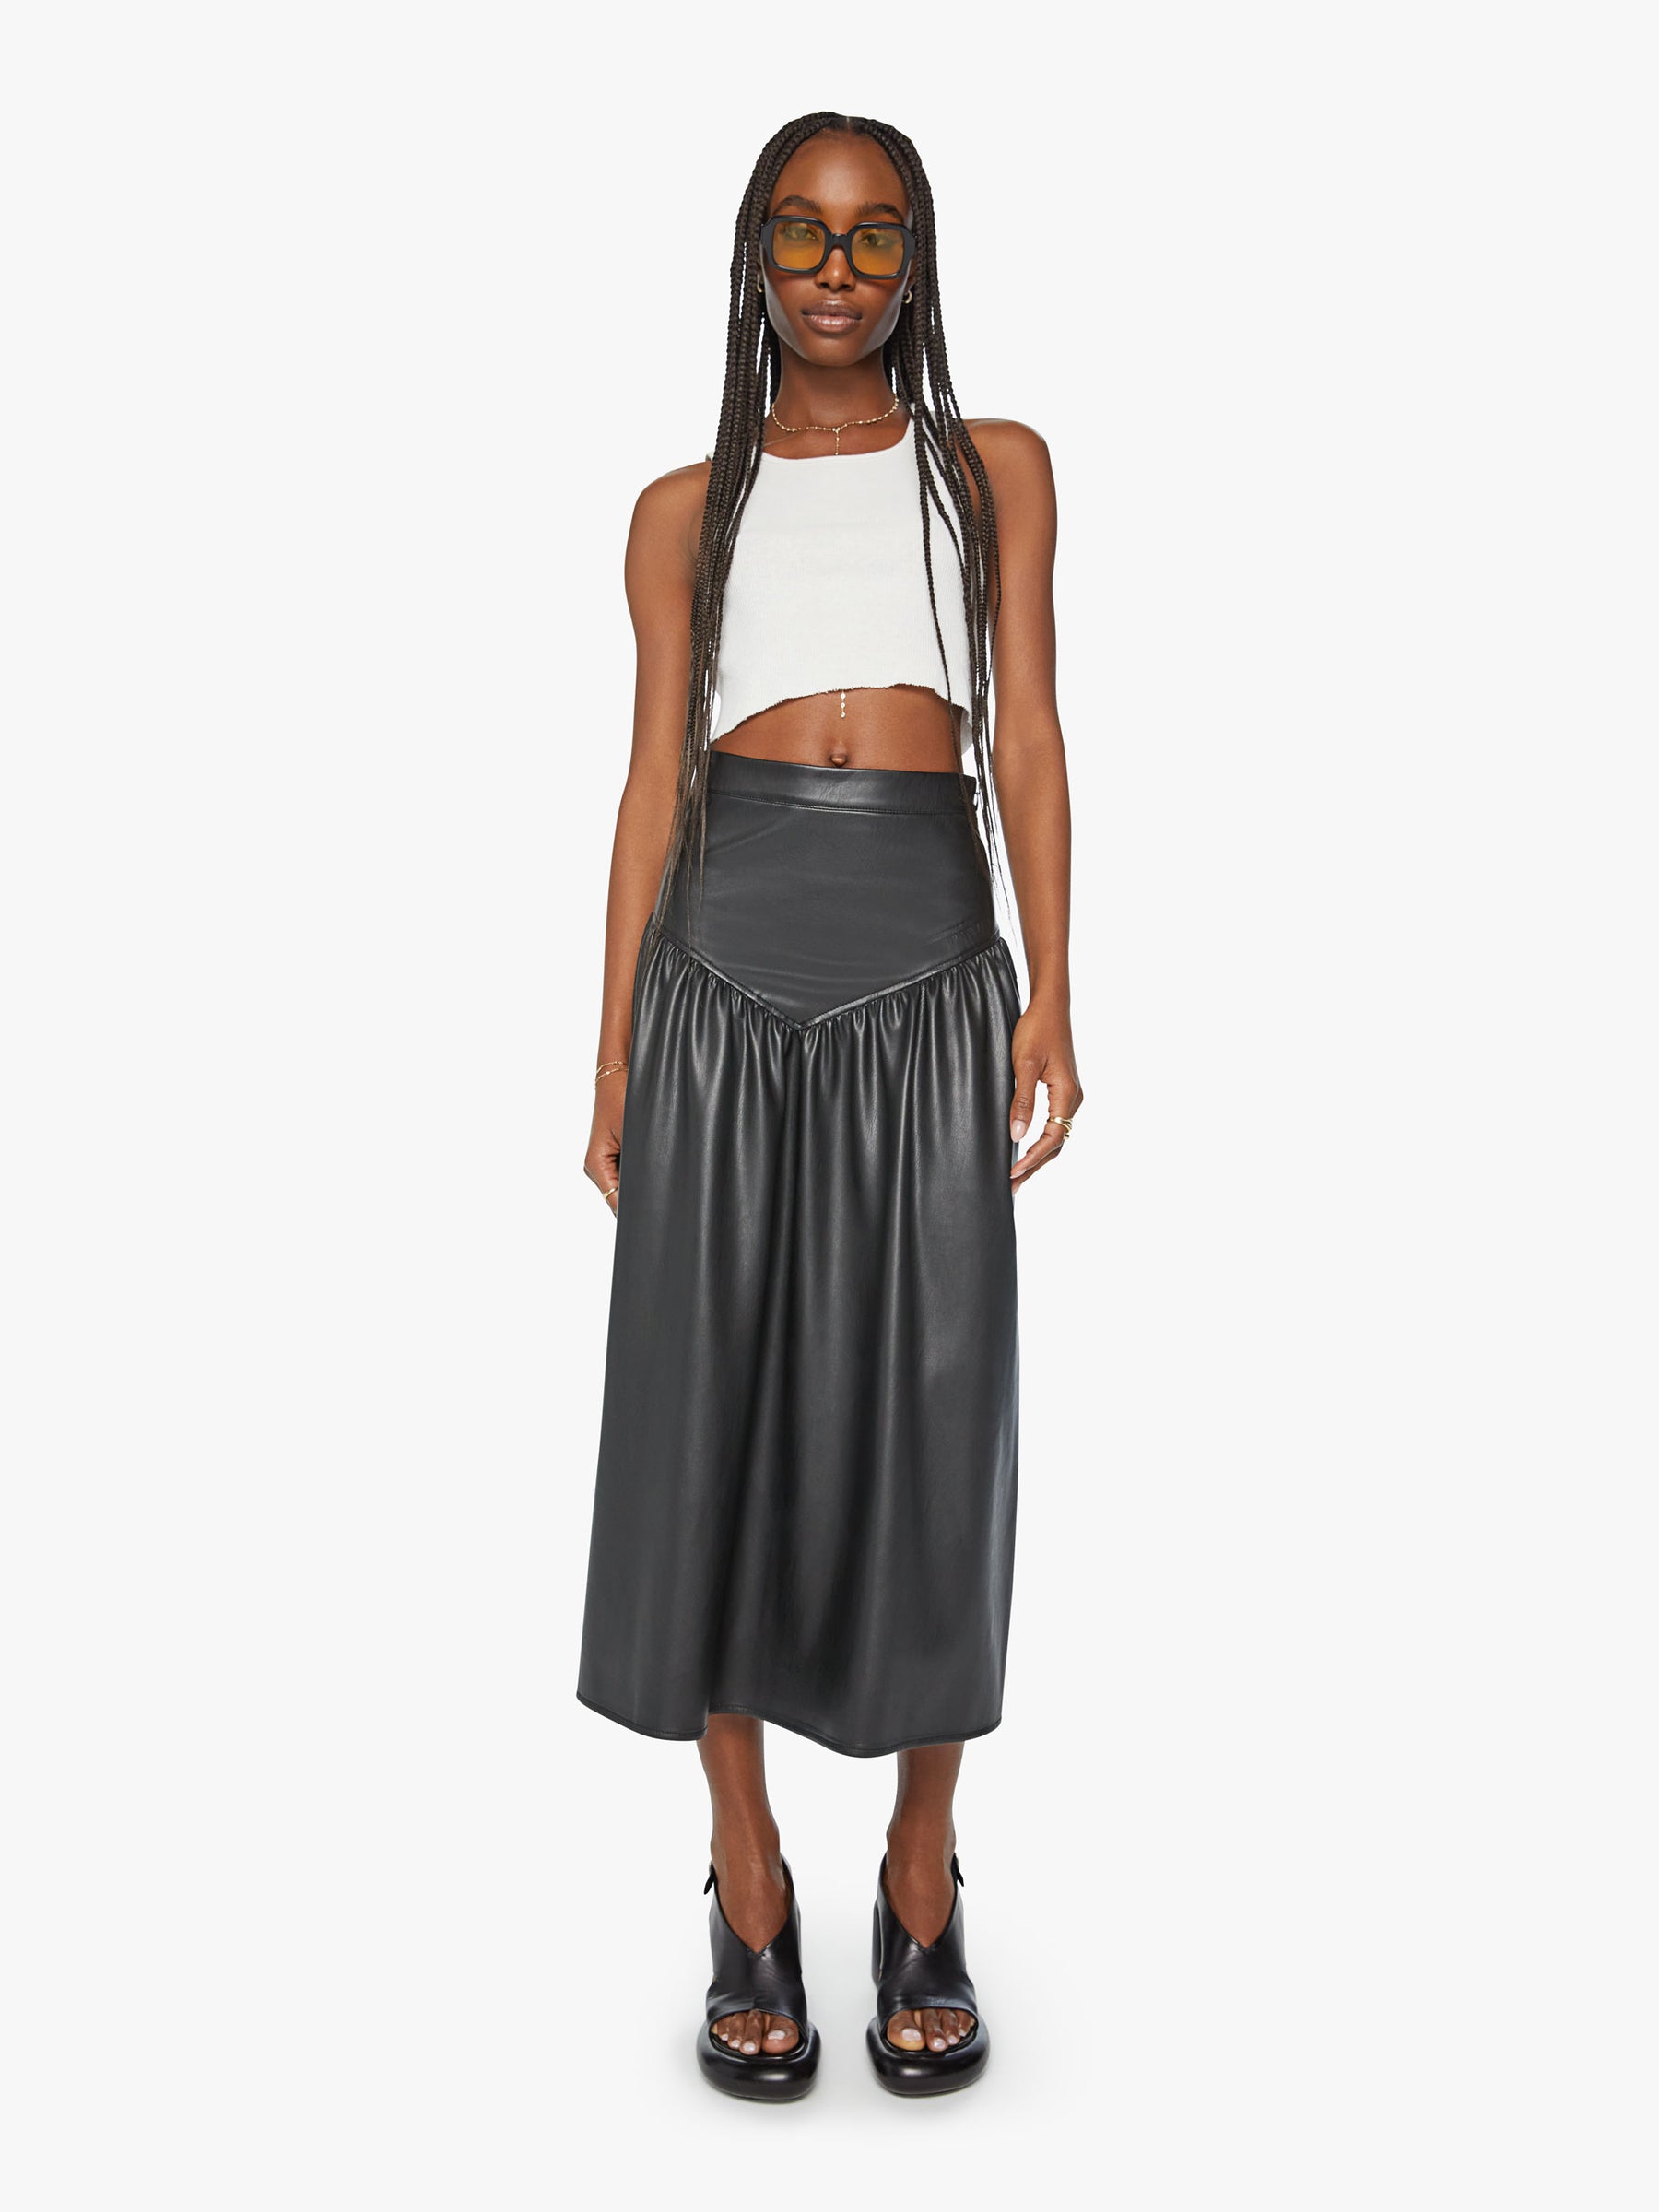 The Gather Your Wits Skirt